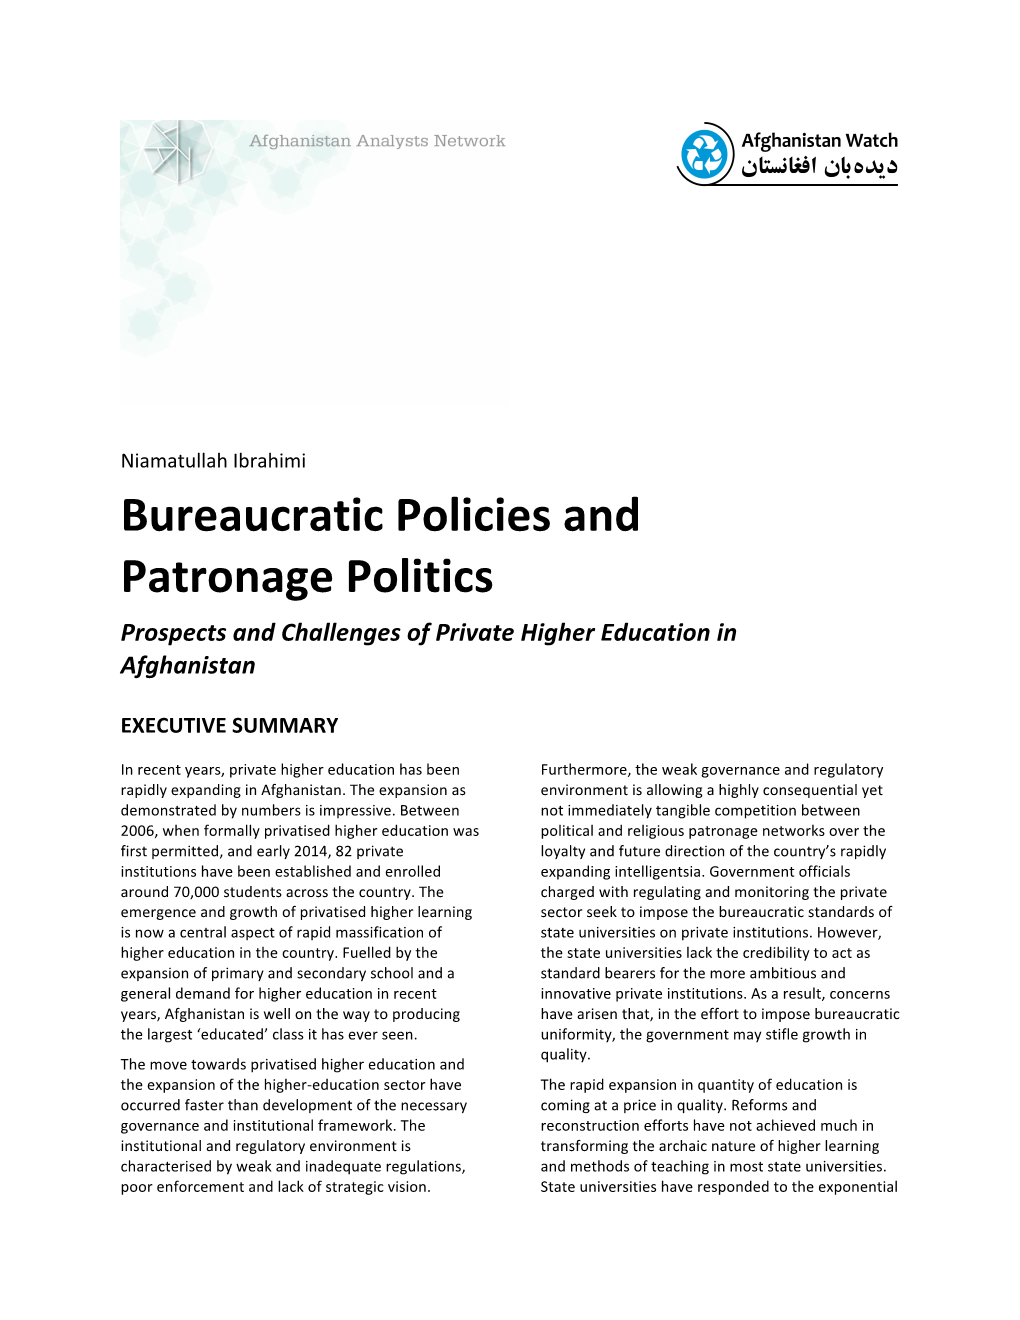 Bureaucratic Policies and Patronage Politics Prospects and Challenges of Private Higher Education in Afghanistan